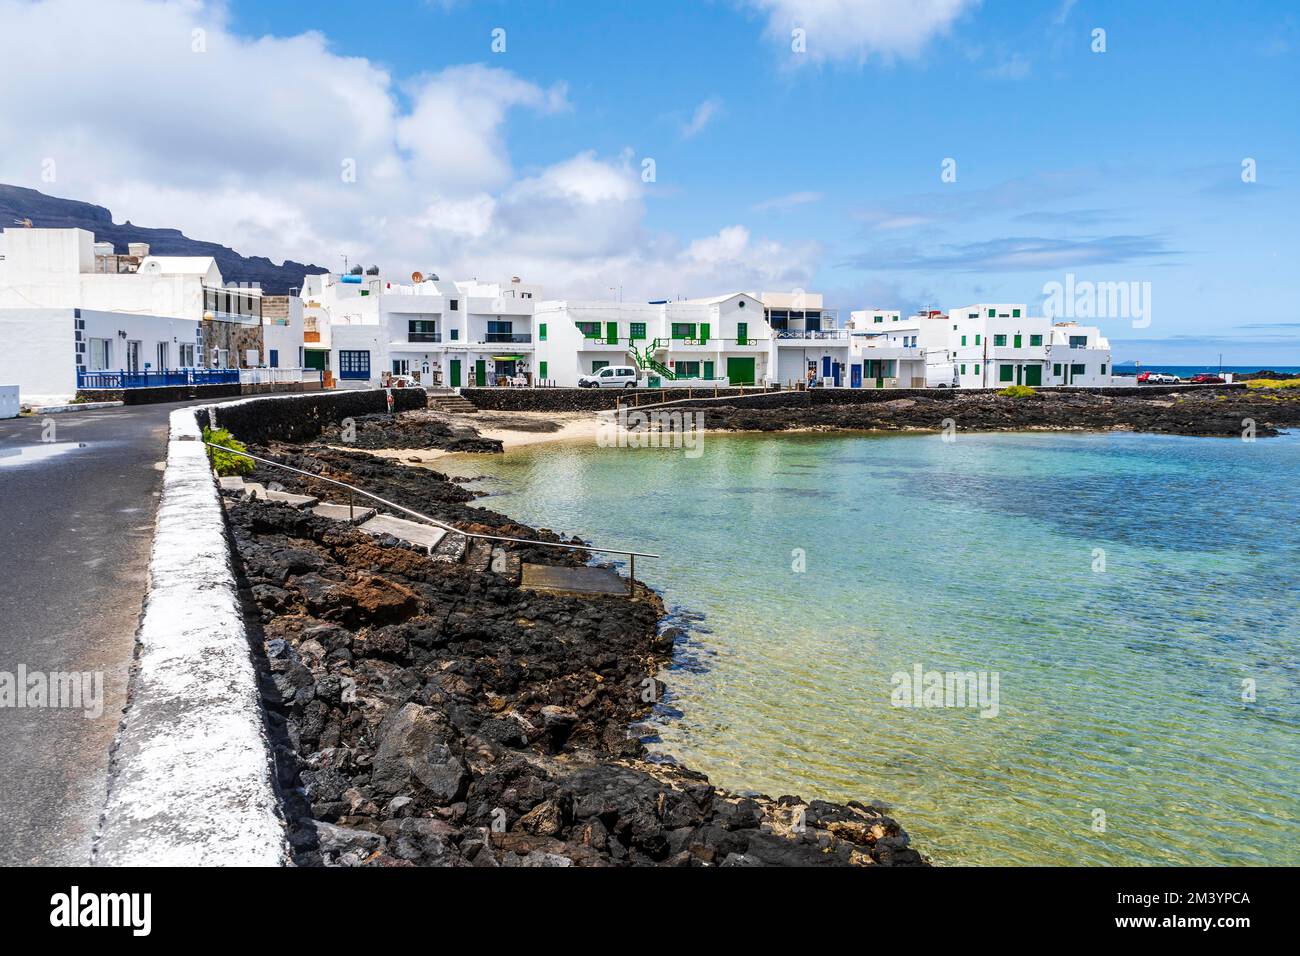 White buildings with blue and green windows by the ocean in Corralejo, Lanzarote, Canary Islands, Spain Stock Photo